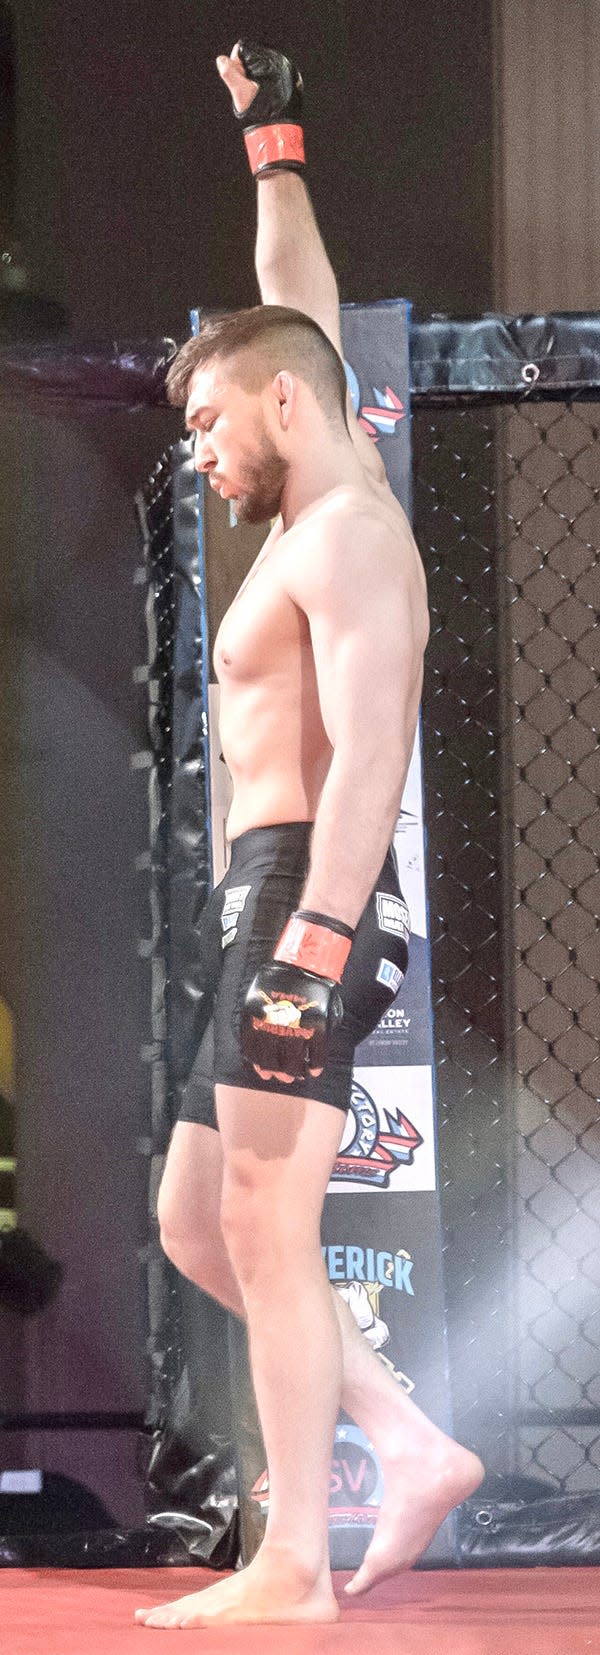 Aaron Kennedy just moments after winning the first professional fight of his mixed martial arts career.